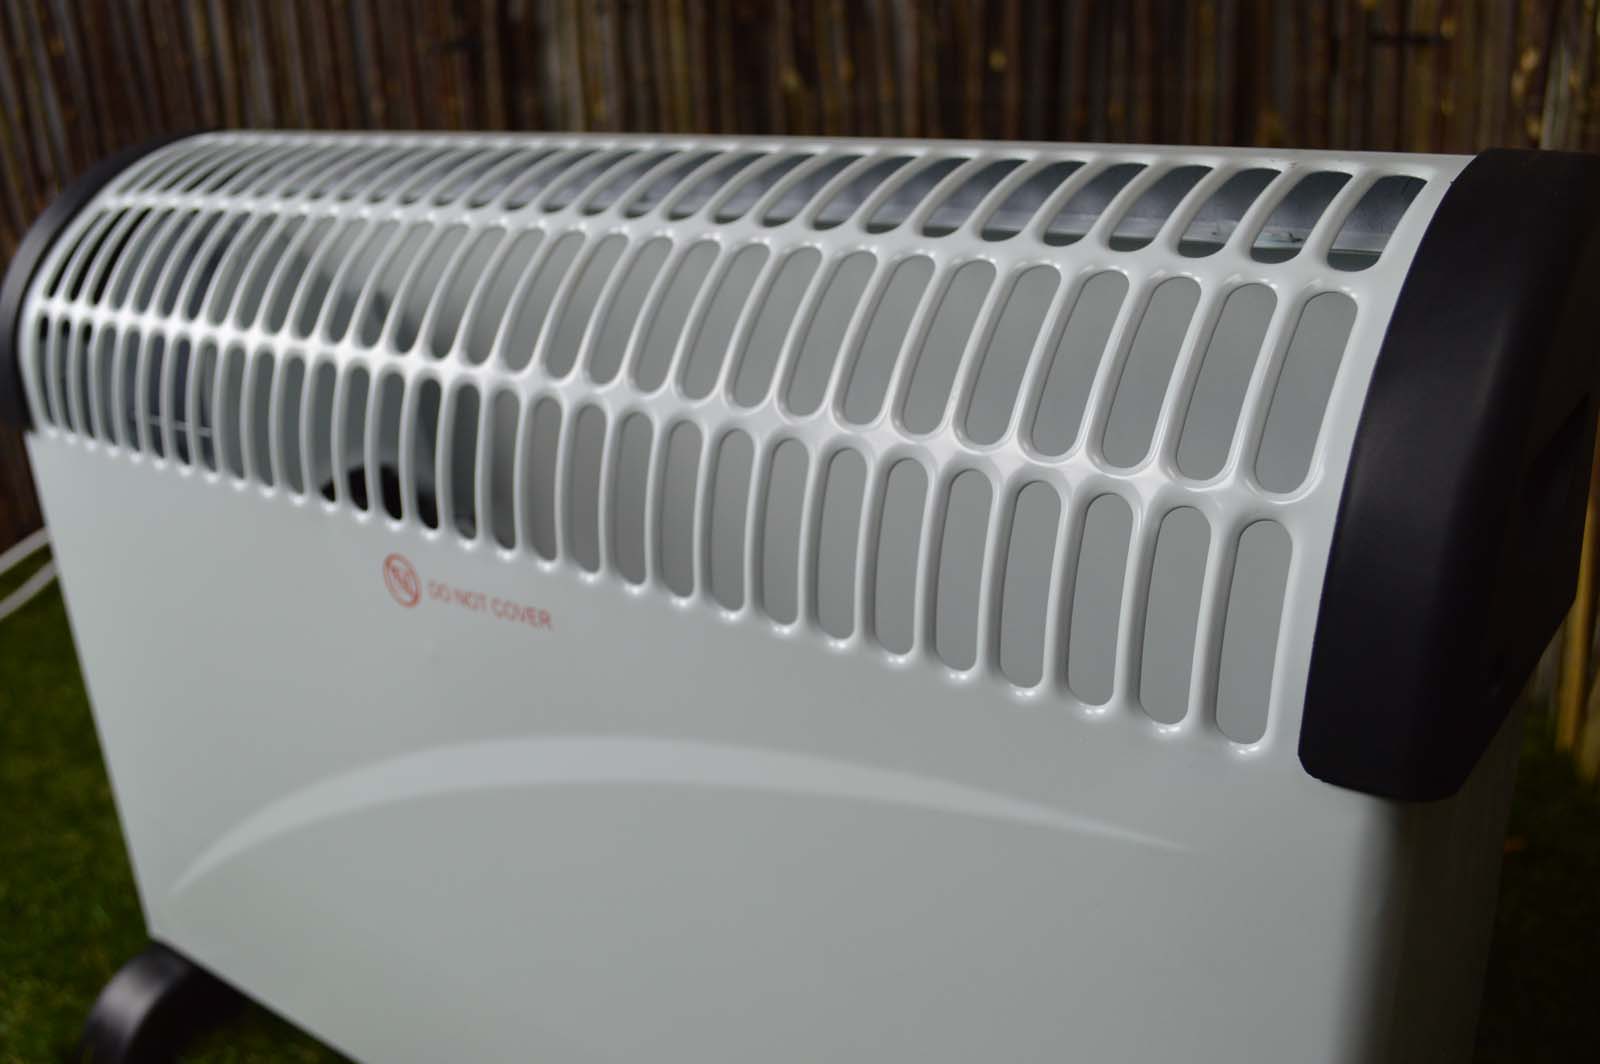 2kw 2000w Convector Heater Radiator with Turbo Fan & 24 Hour Timer